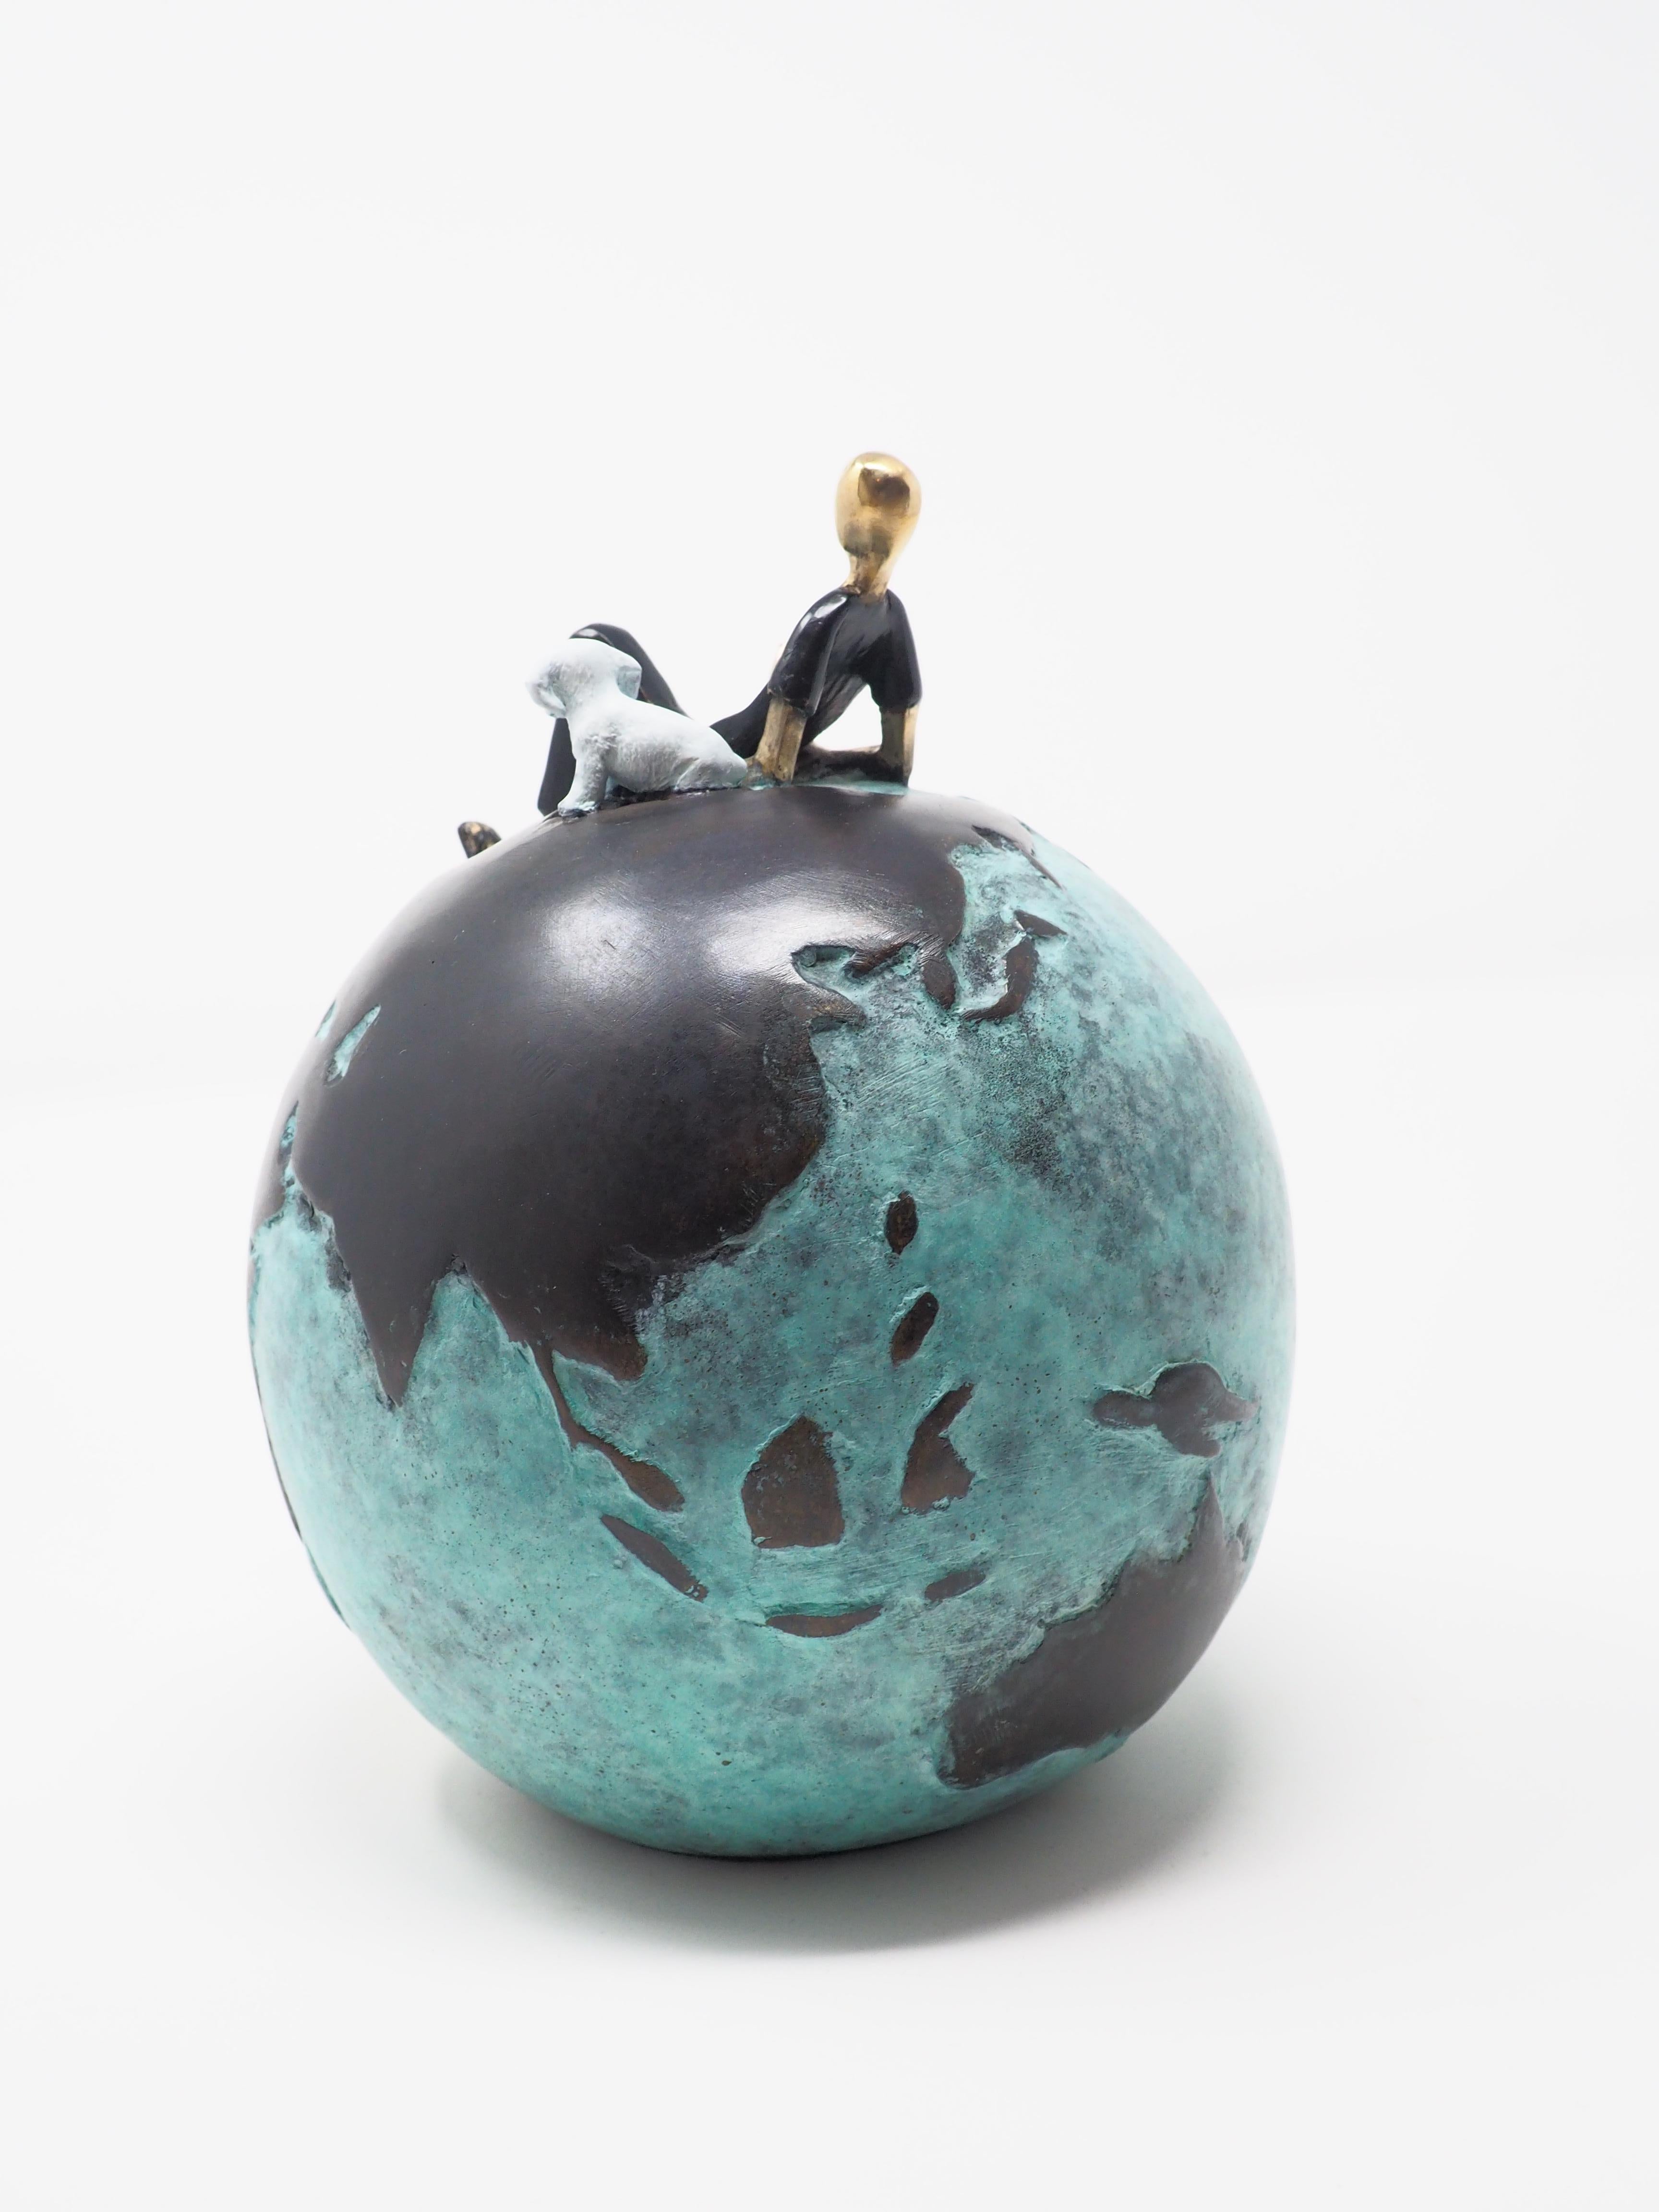 Laid back- figurative bronze sculpture of a man with a dog on a globe - Contemporary Sculpture by Mireia Serra